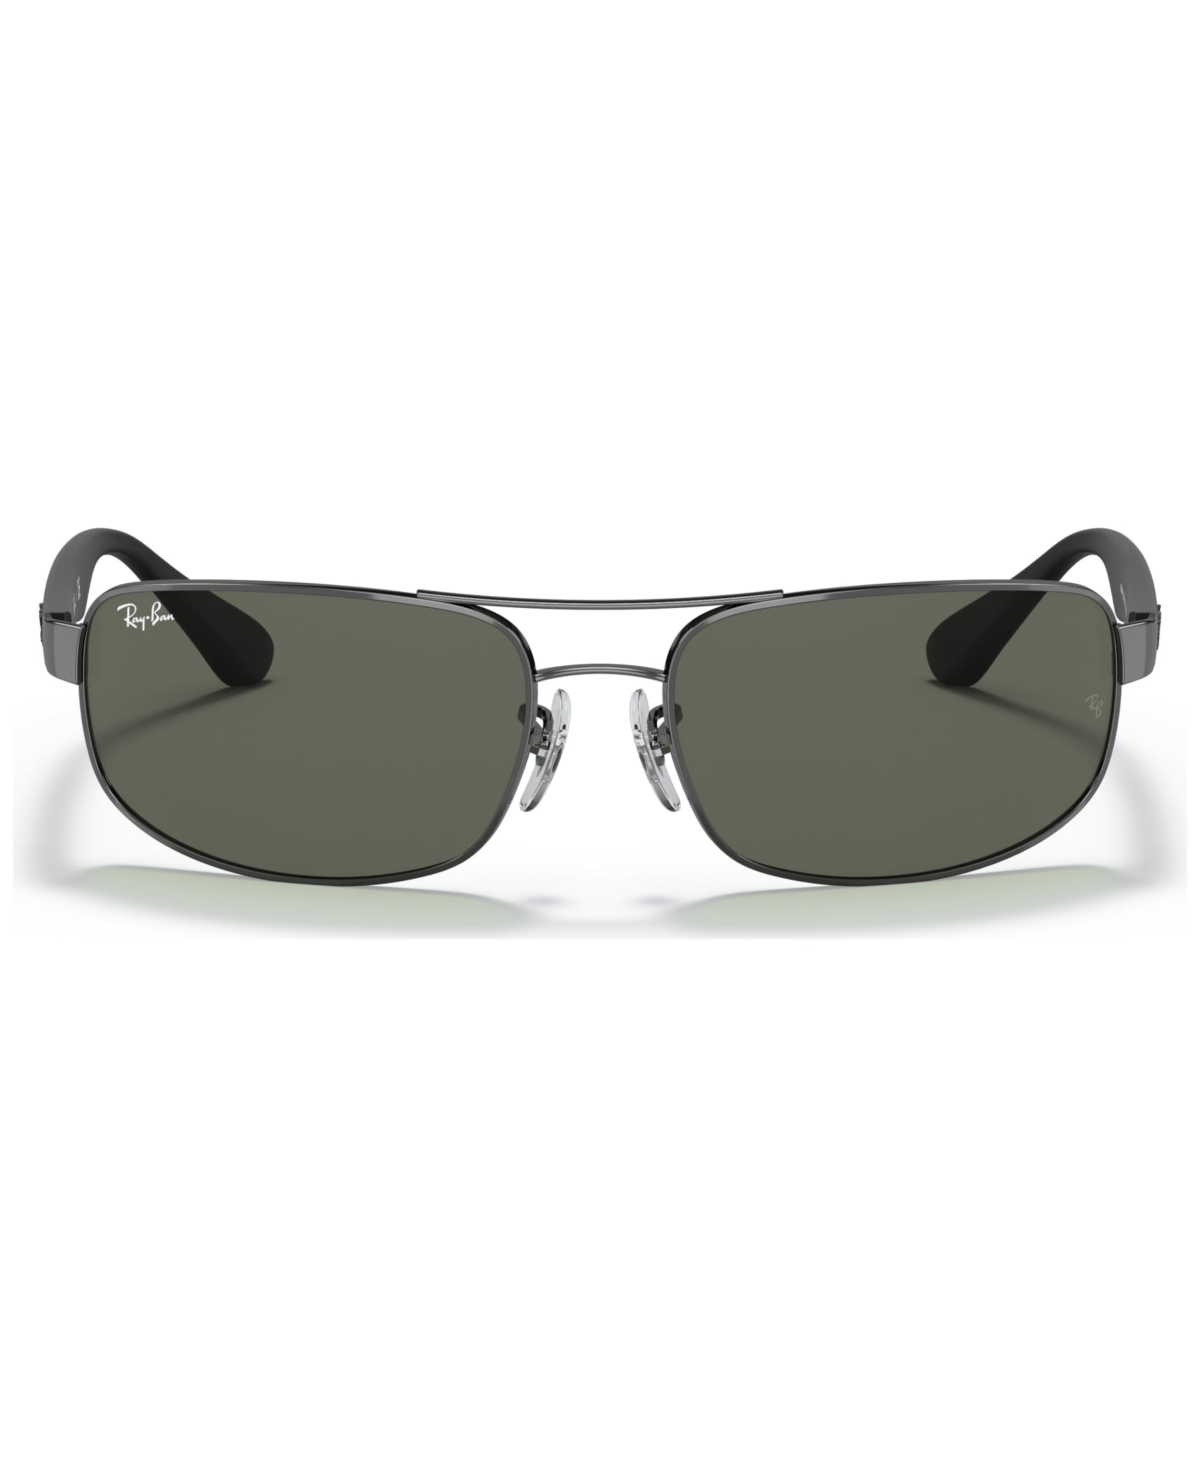 Ray Ban Sunglasses, Rb3445 In Multicolored,green